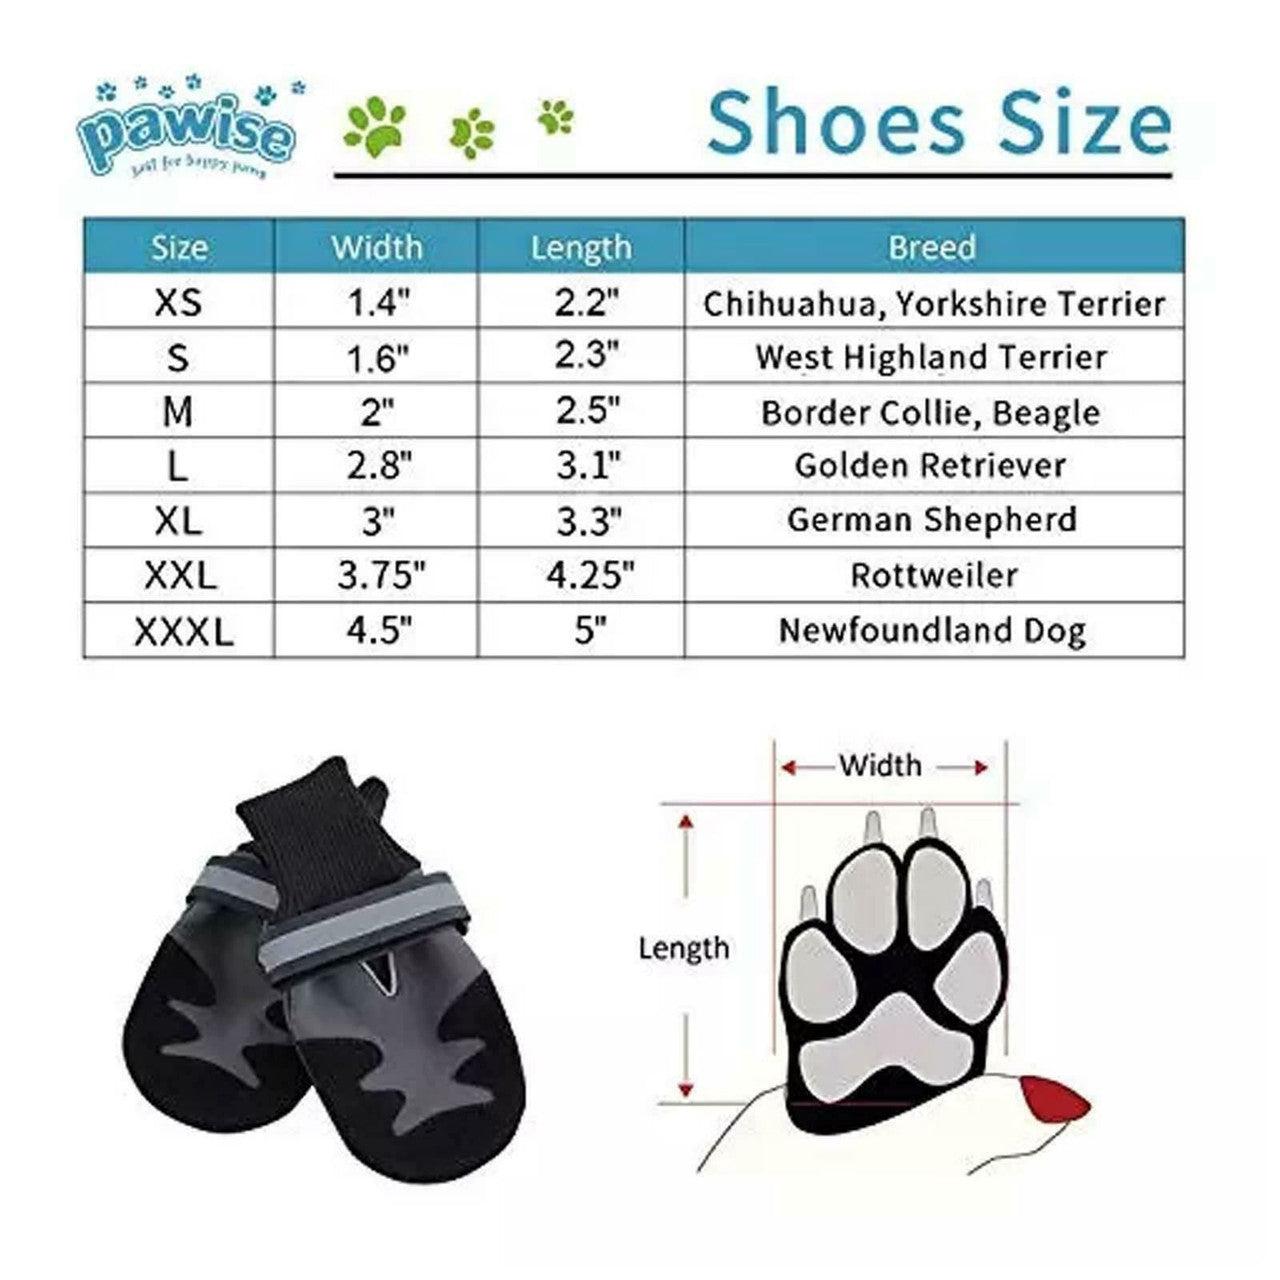 Pawise Doggy Boots Size L-Pettitt and Boo